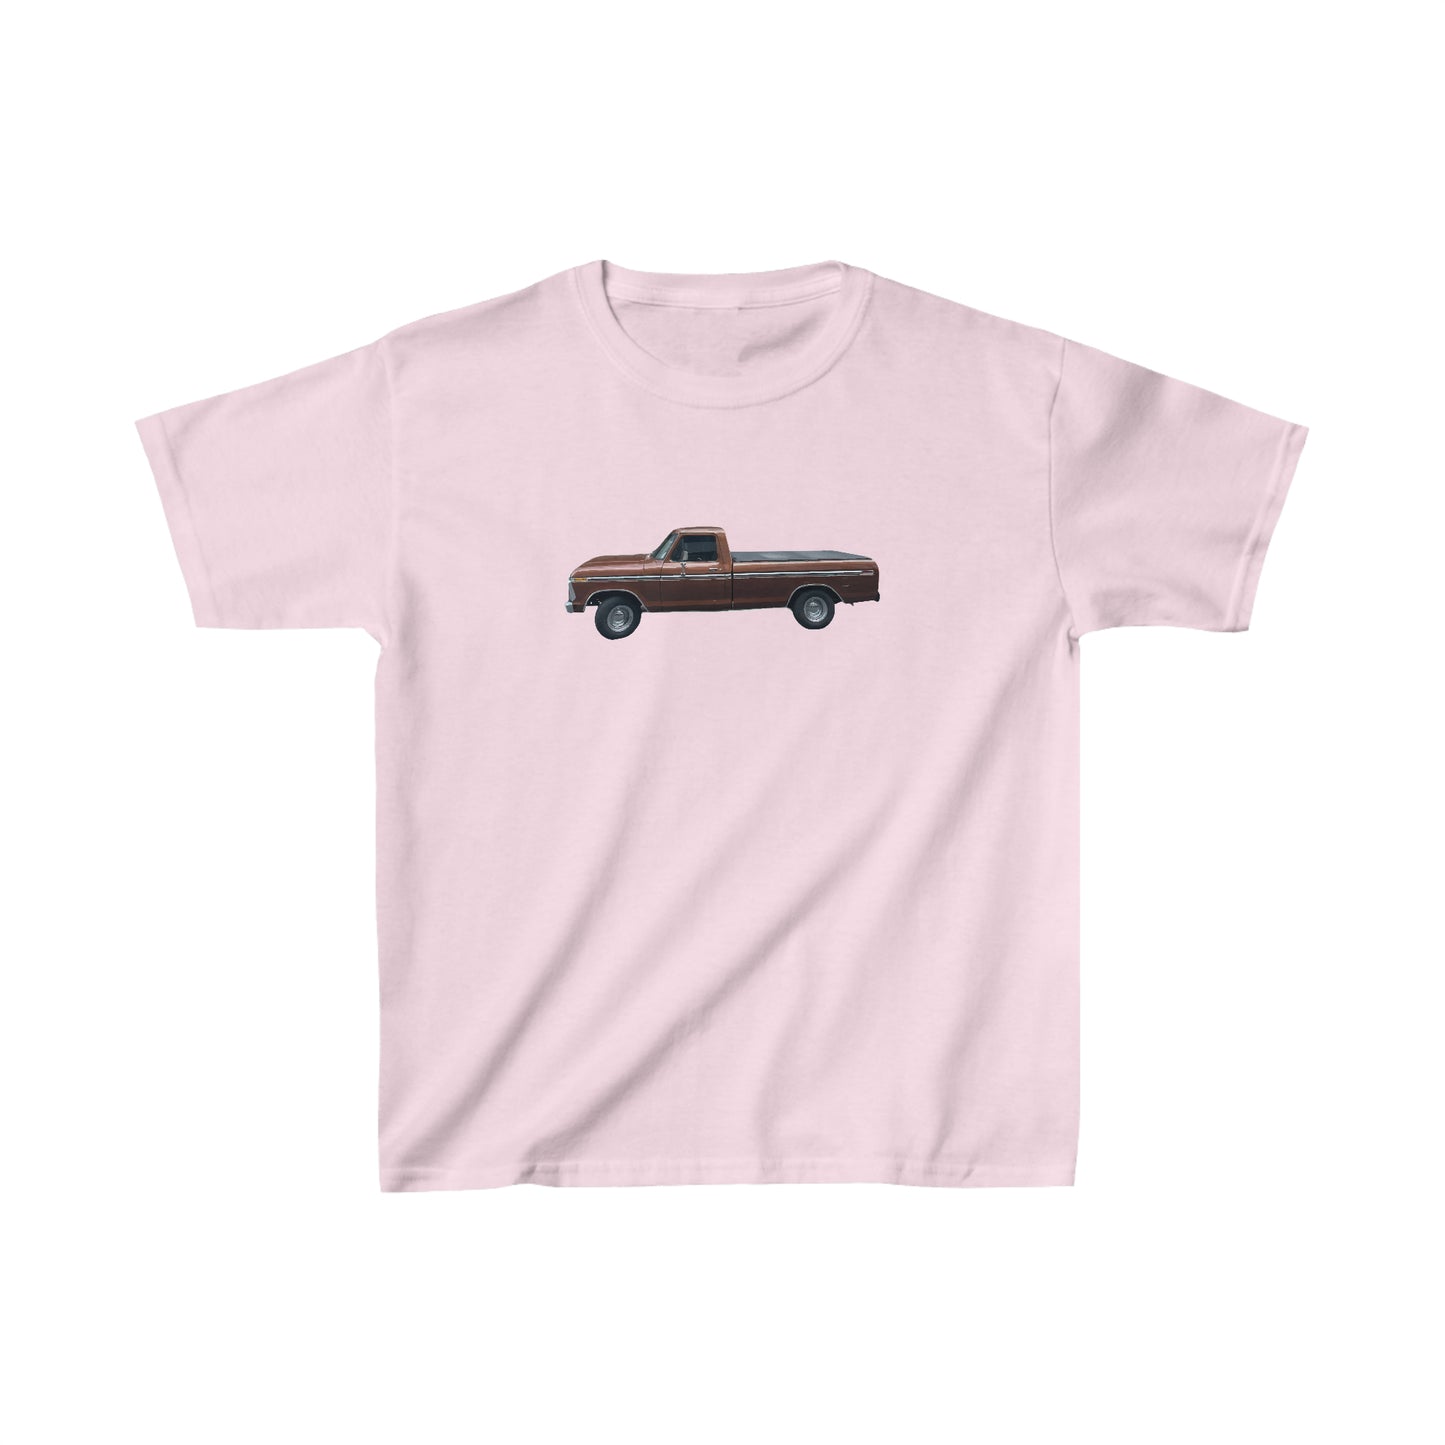 Antique Ford Truck Boxy Fit Baby Tee